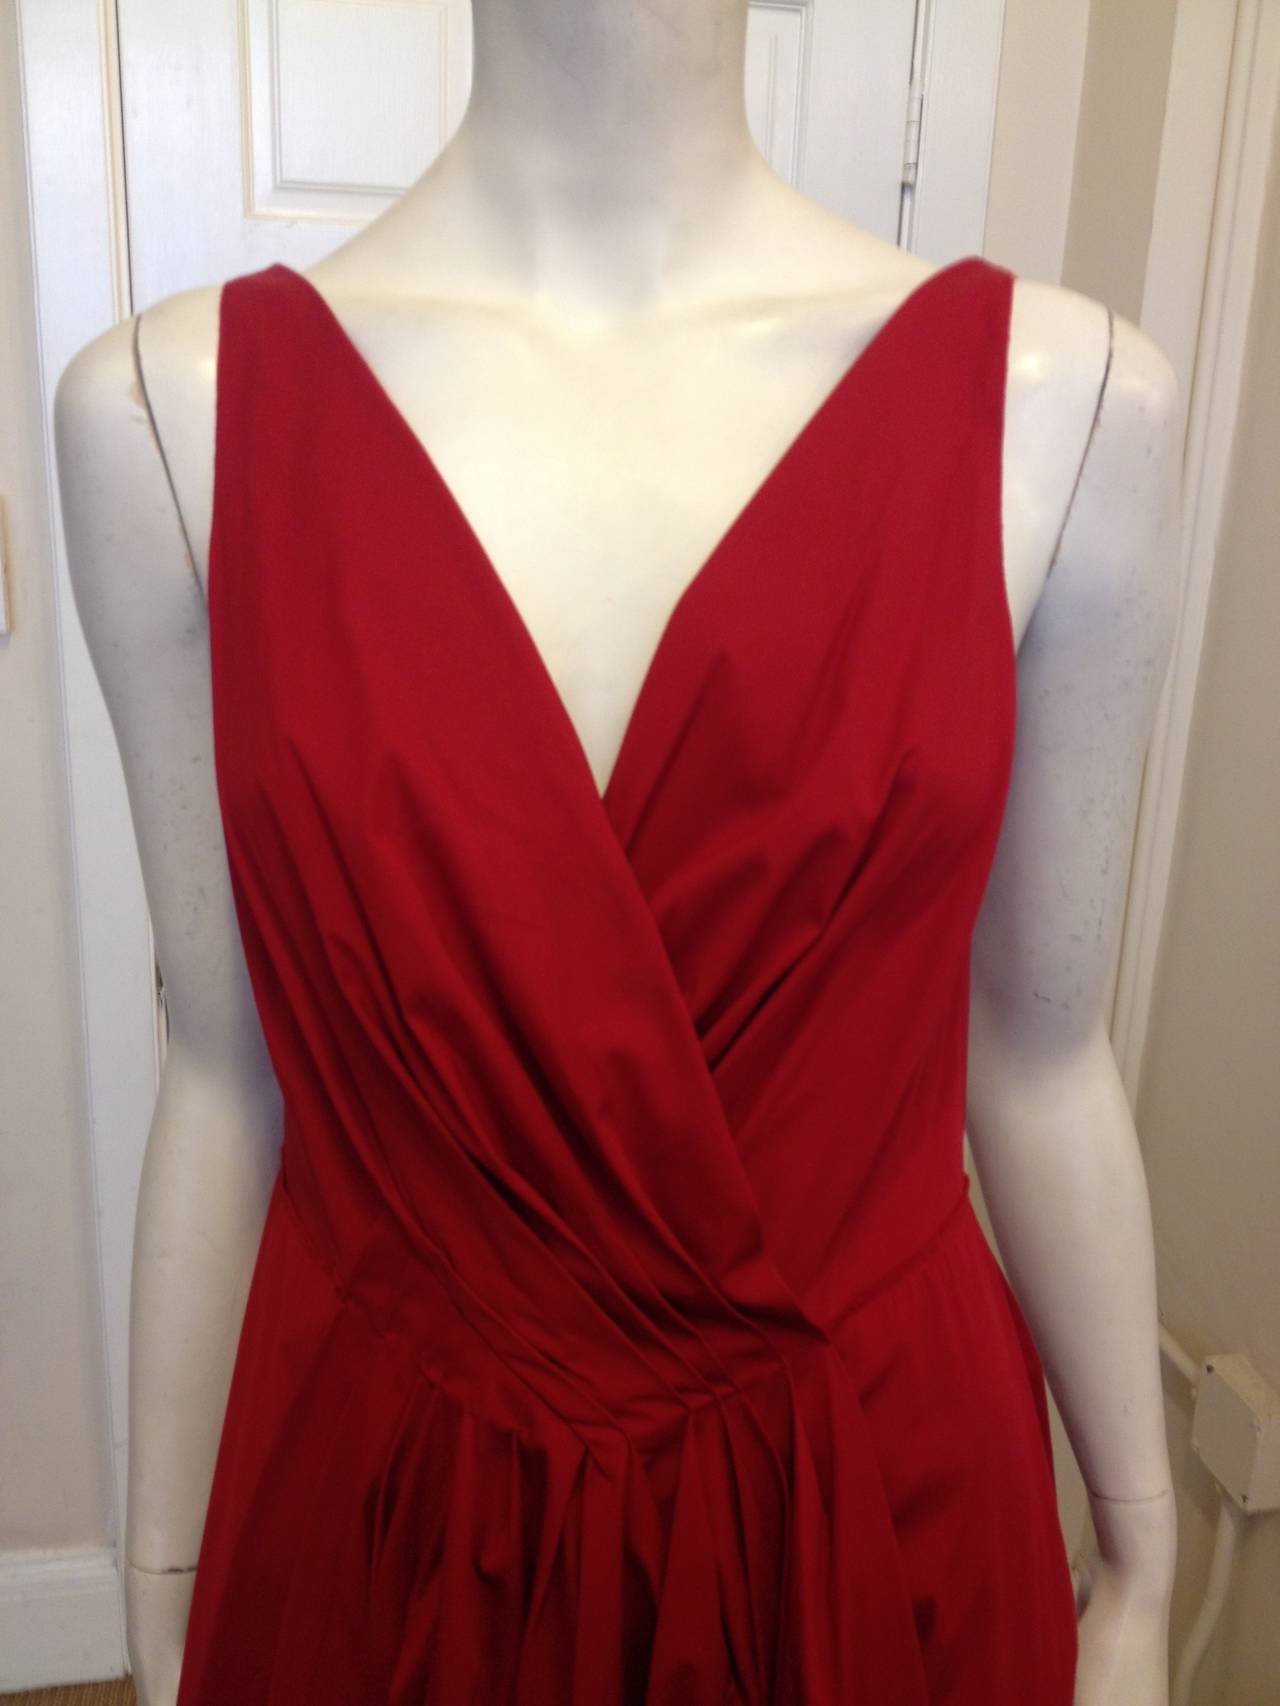 Nothing is more charming and eye catching than a bright red dress. The v-shaped neckline in the back complements the deep V in the front, which sweeps down into two angled sets of crossing pleats that create plenty of flare and movement. Four